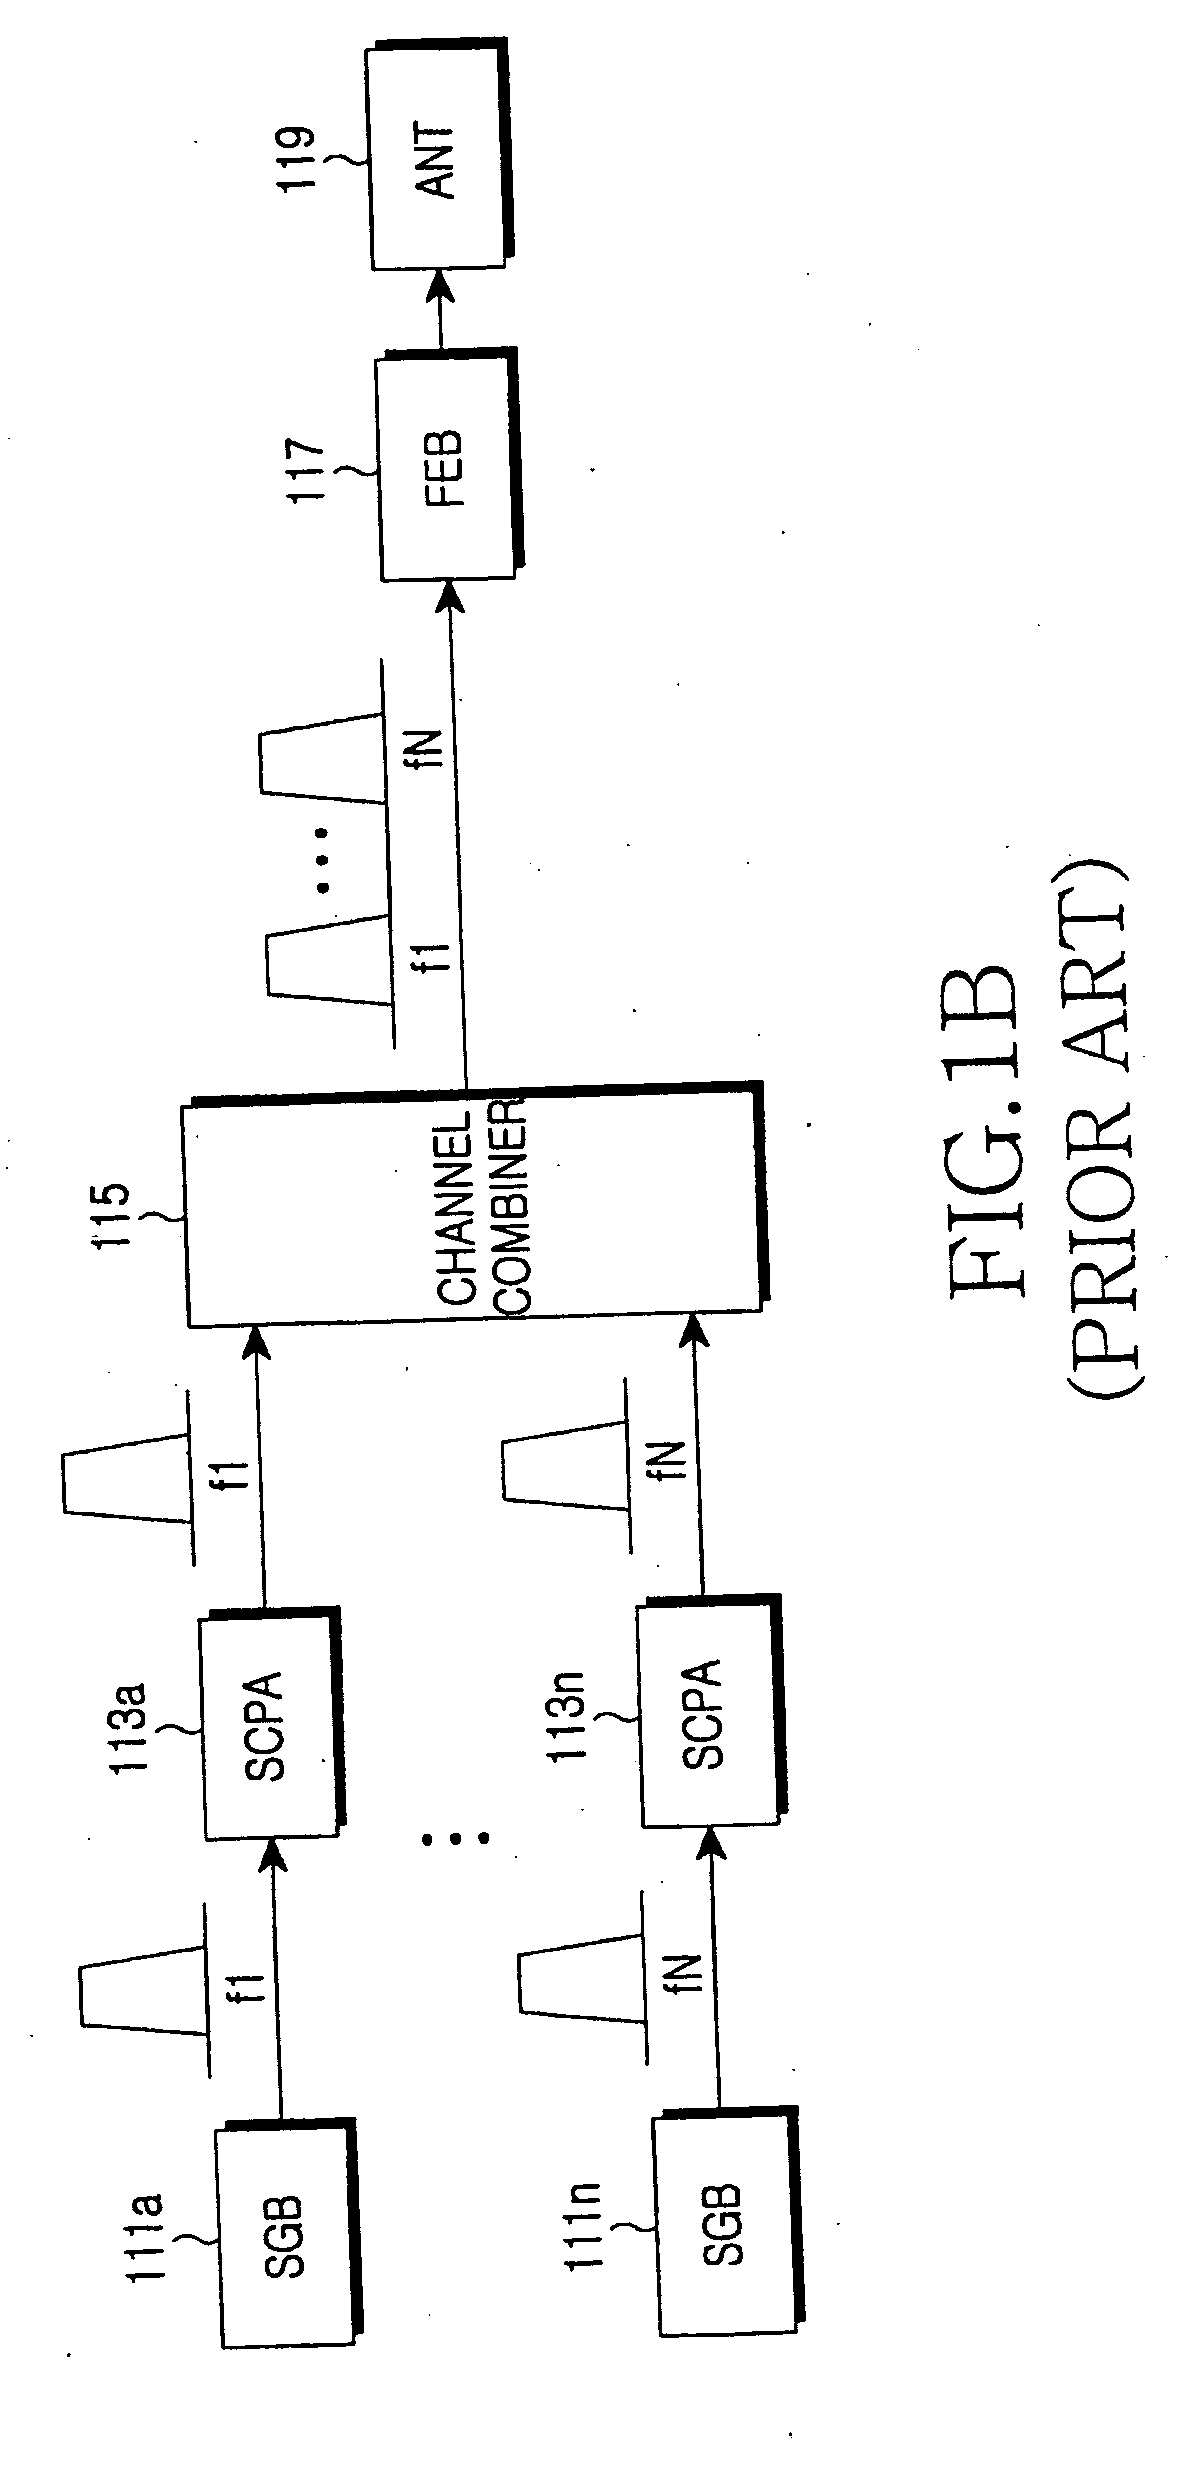 Apparatus and method for transmitting a signal in a communication system